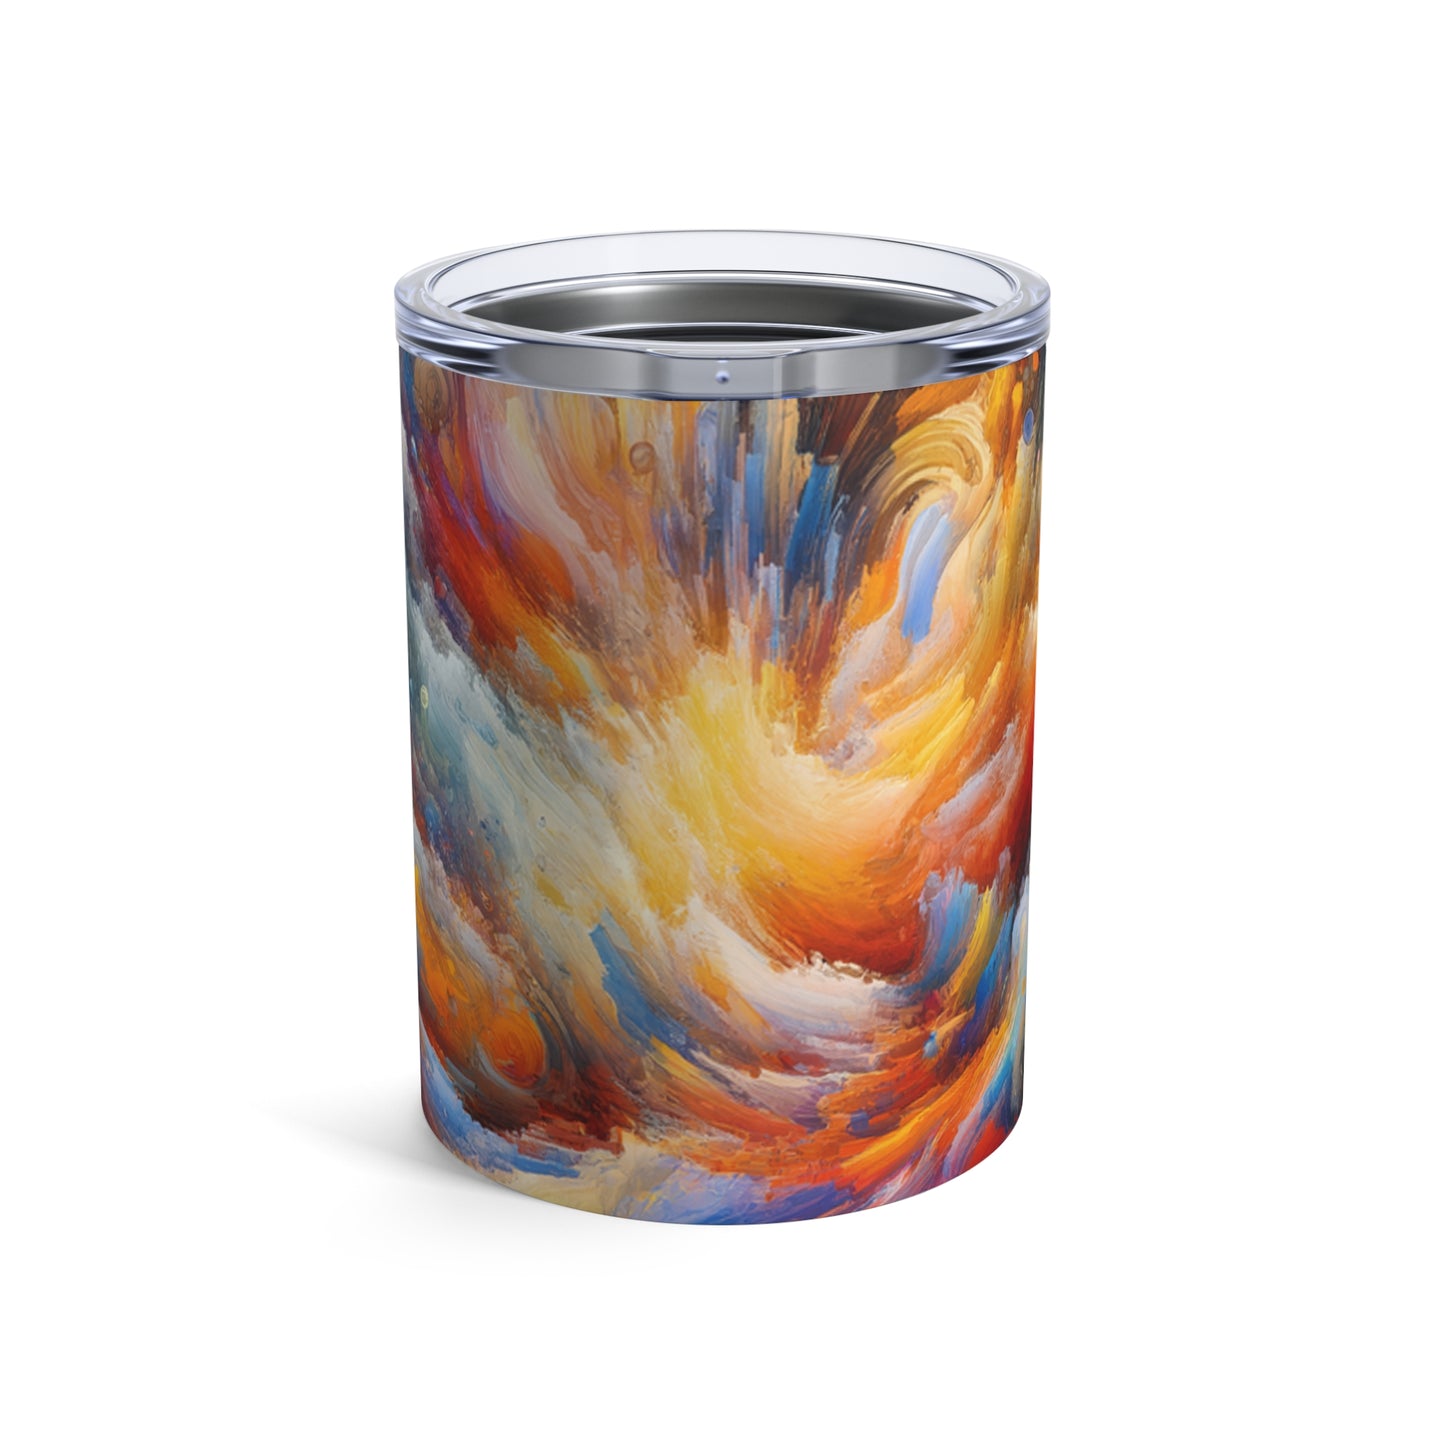 "Vibrant Chaos". - The Alien Tumbler 10oz Abstract Expressionism Style